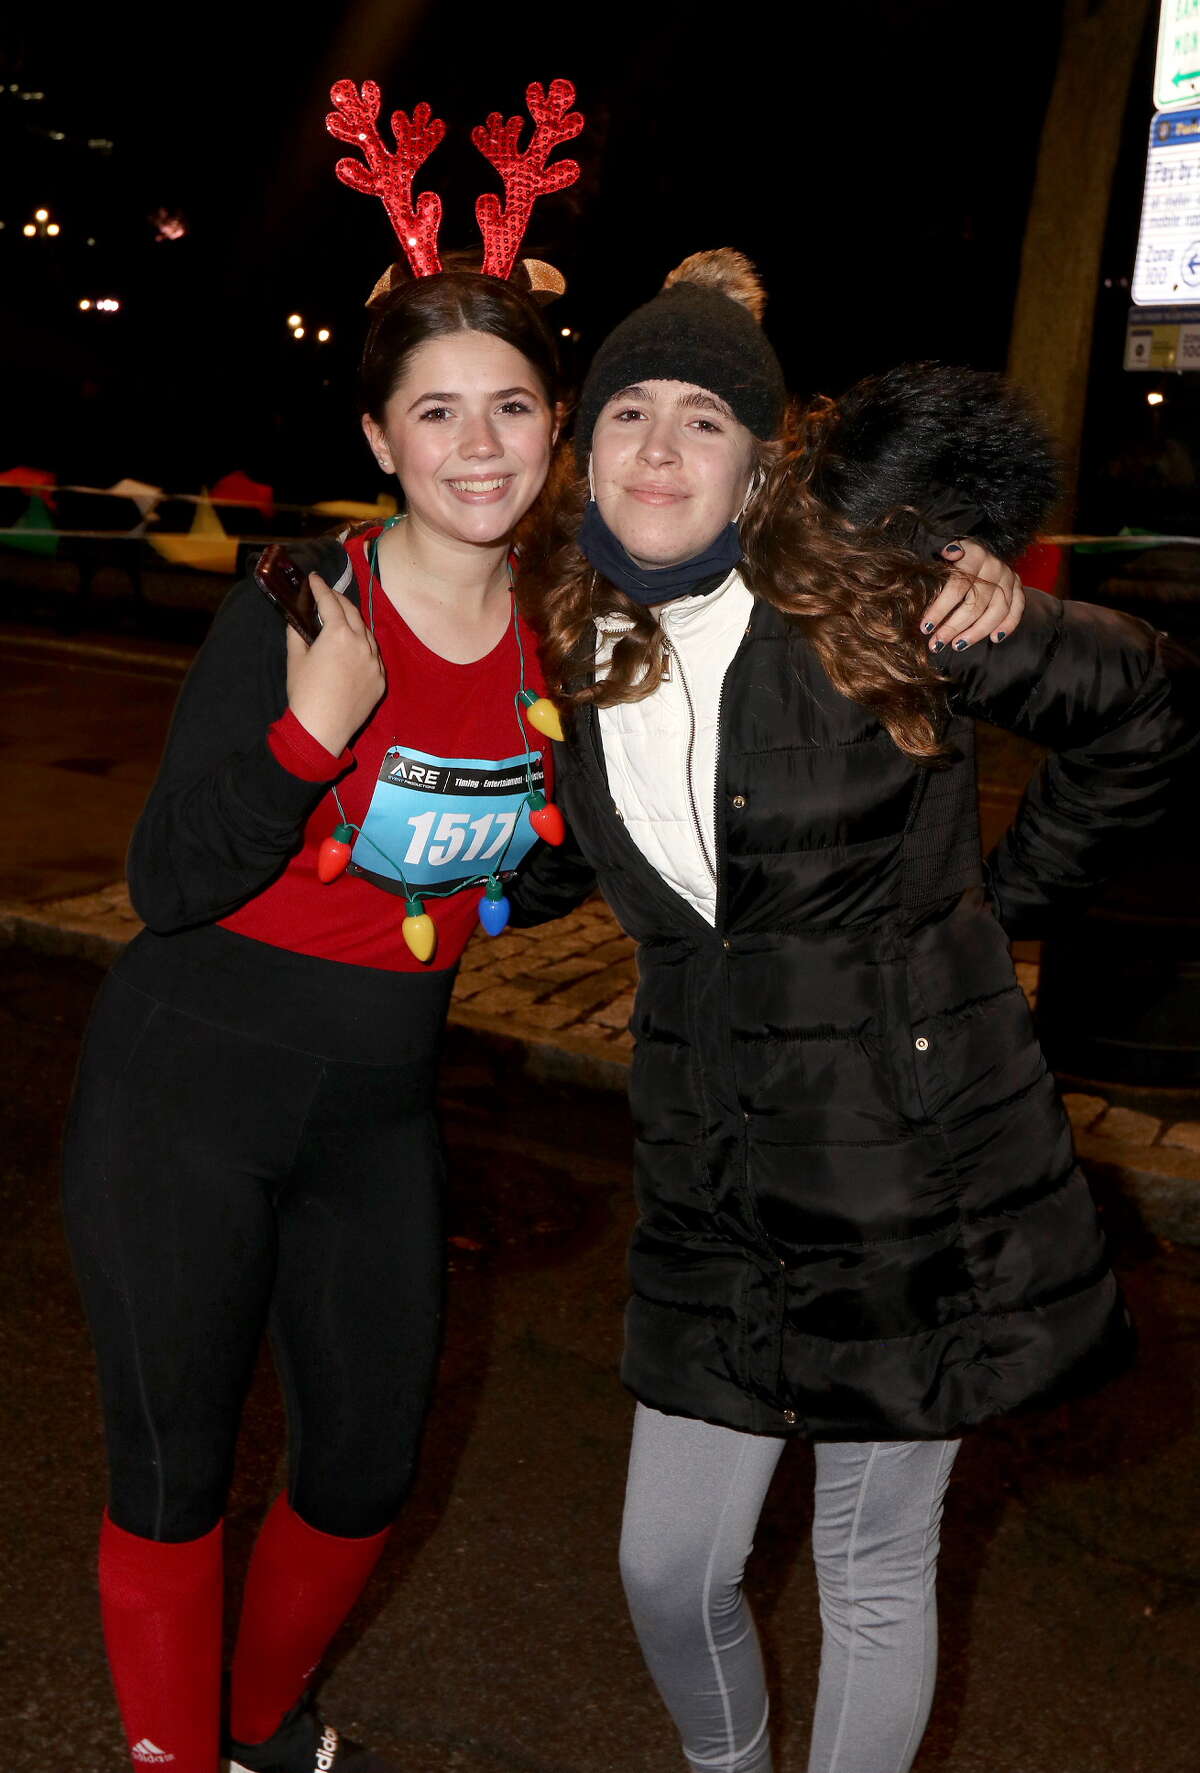 Were You Seen at The 25th Annual St. Peter's Cardiac & Vascular Center Albany Last Run 5K on Dec. 11, 2021, in downtown Albany?